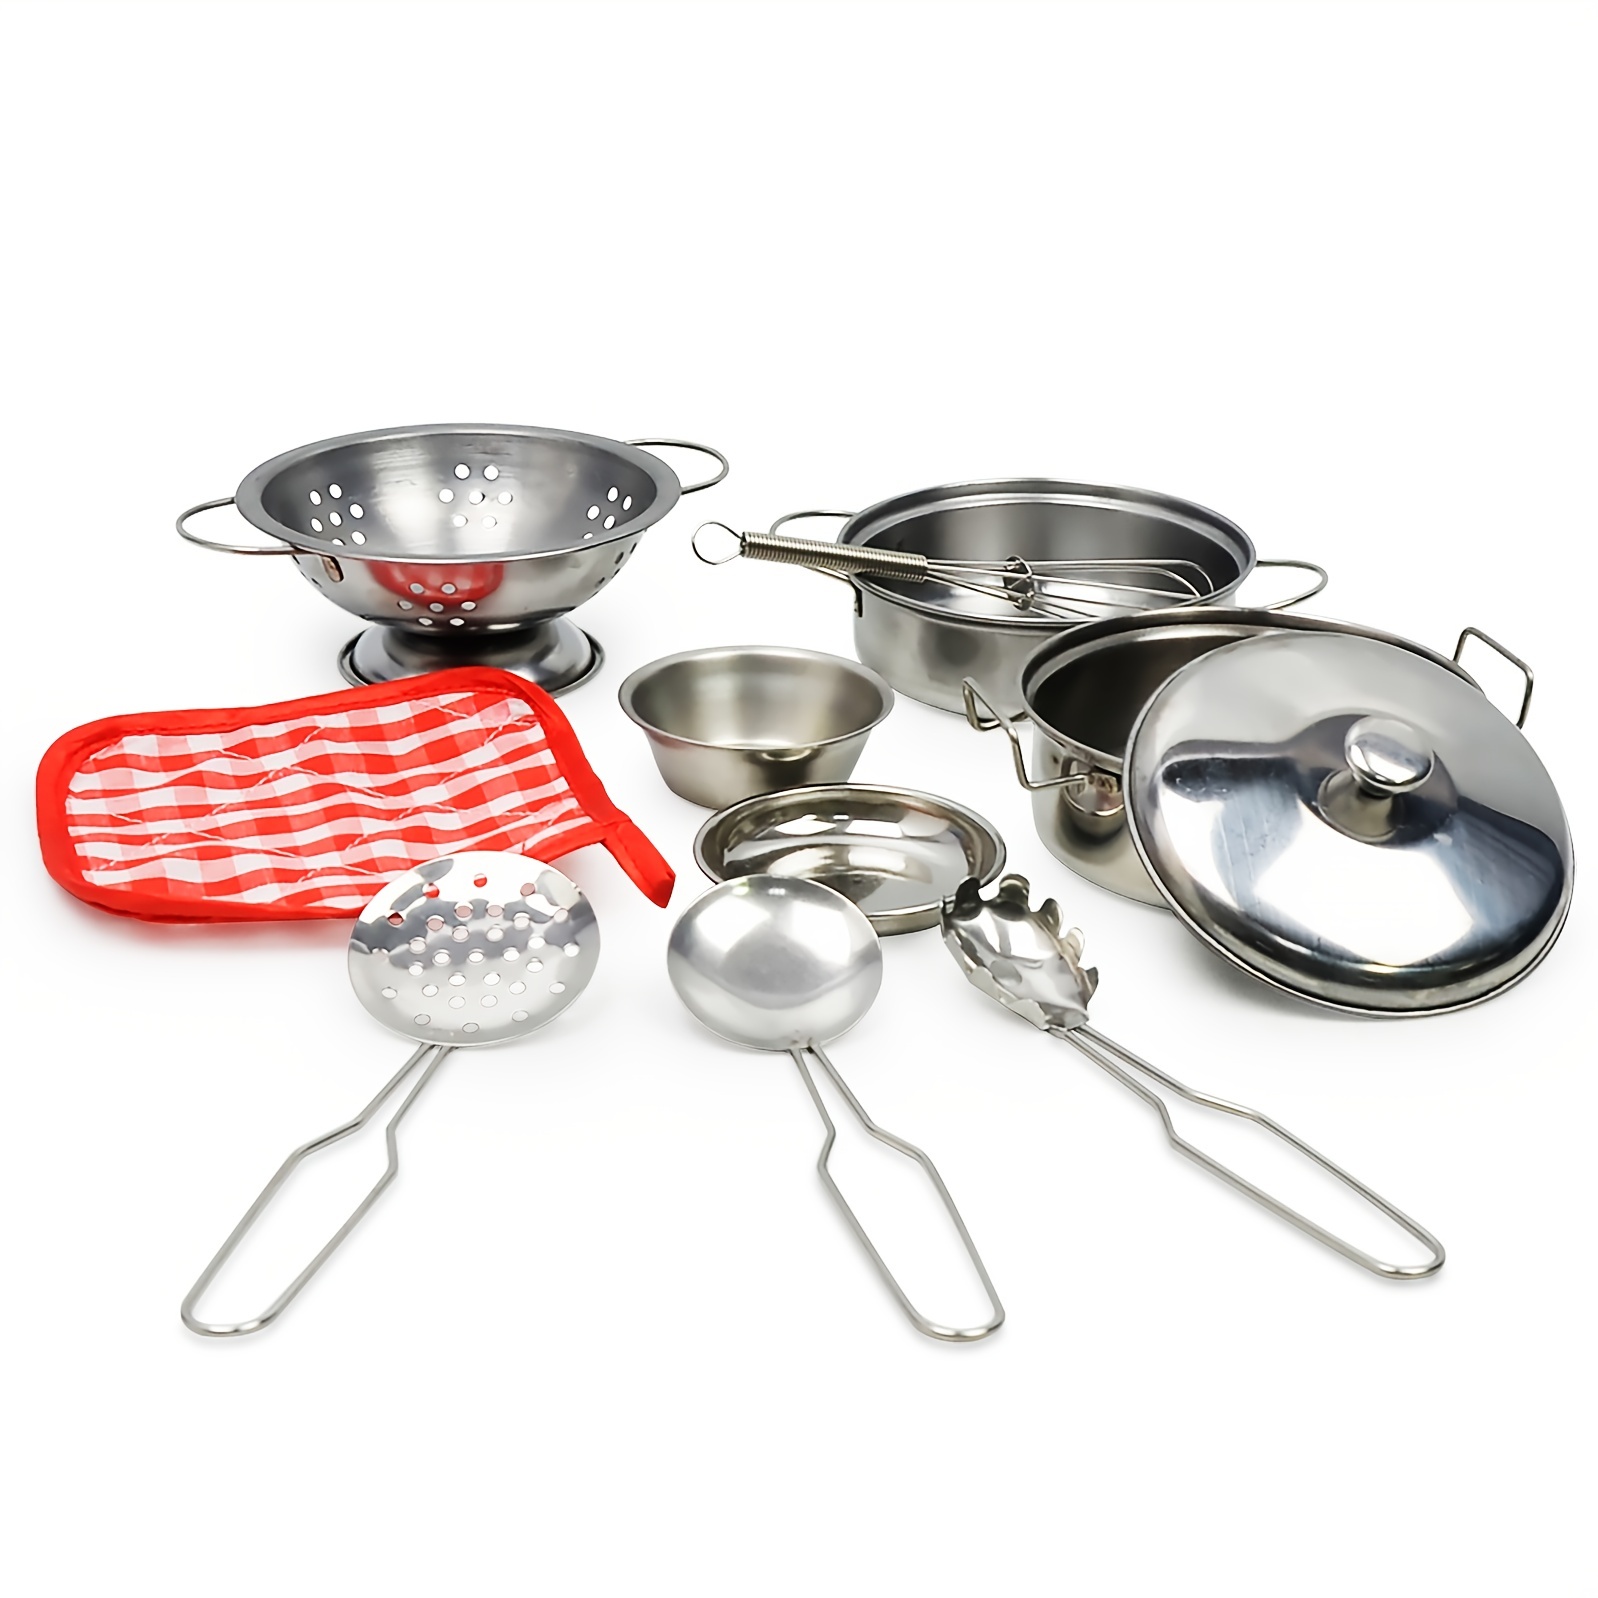 Food Grade Safe Real Mini Cooking Set Metal Cookware & Stove Tiny Kitchen  Role Playing B-day Xmas Gift Toy 